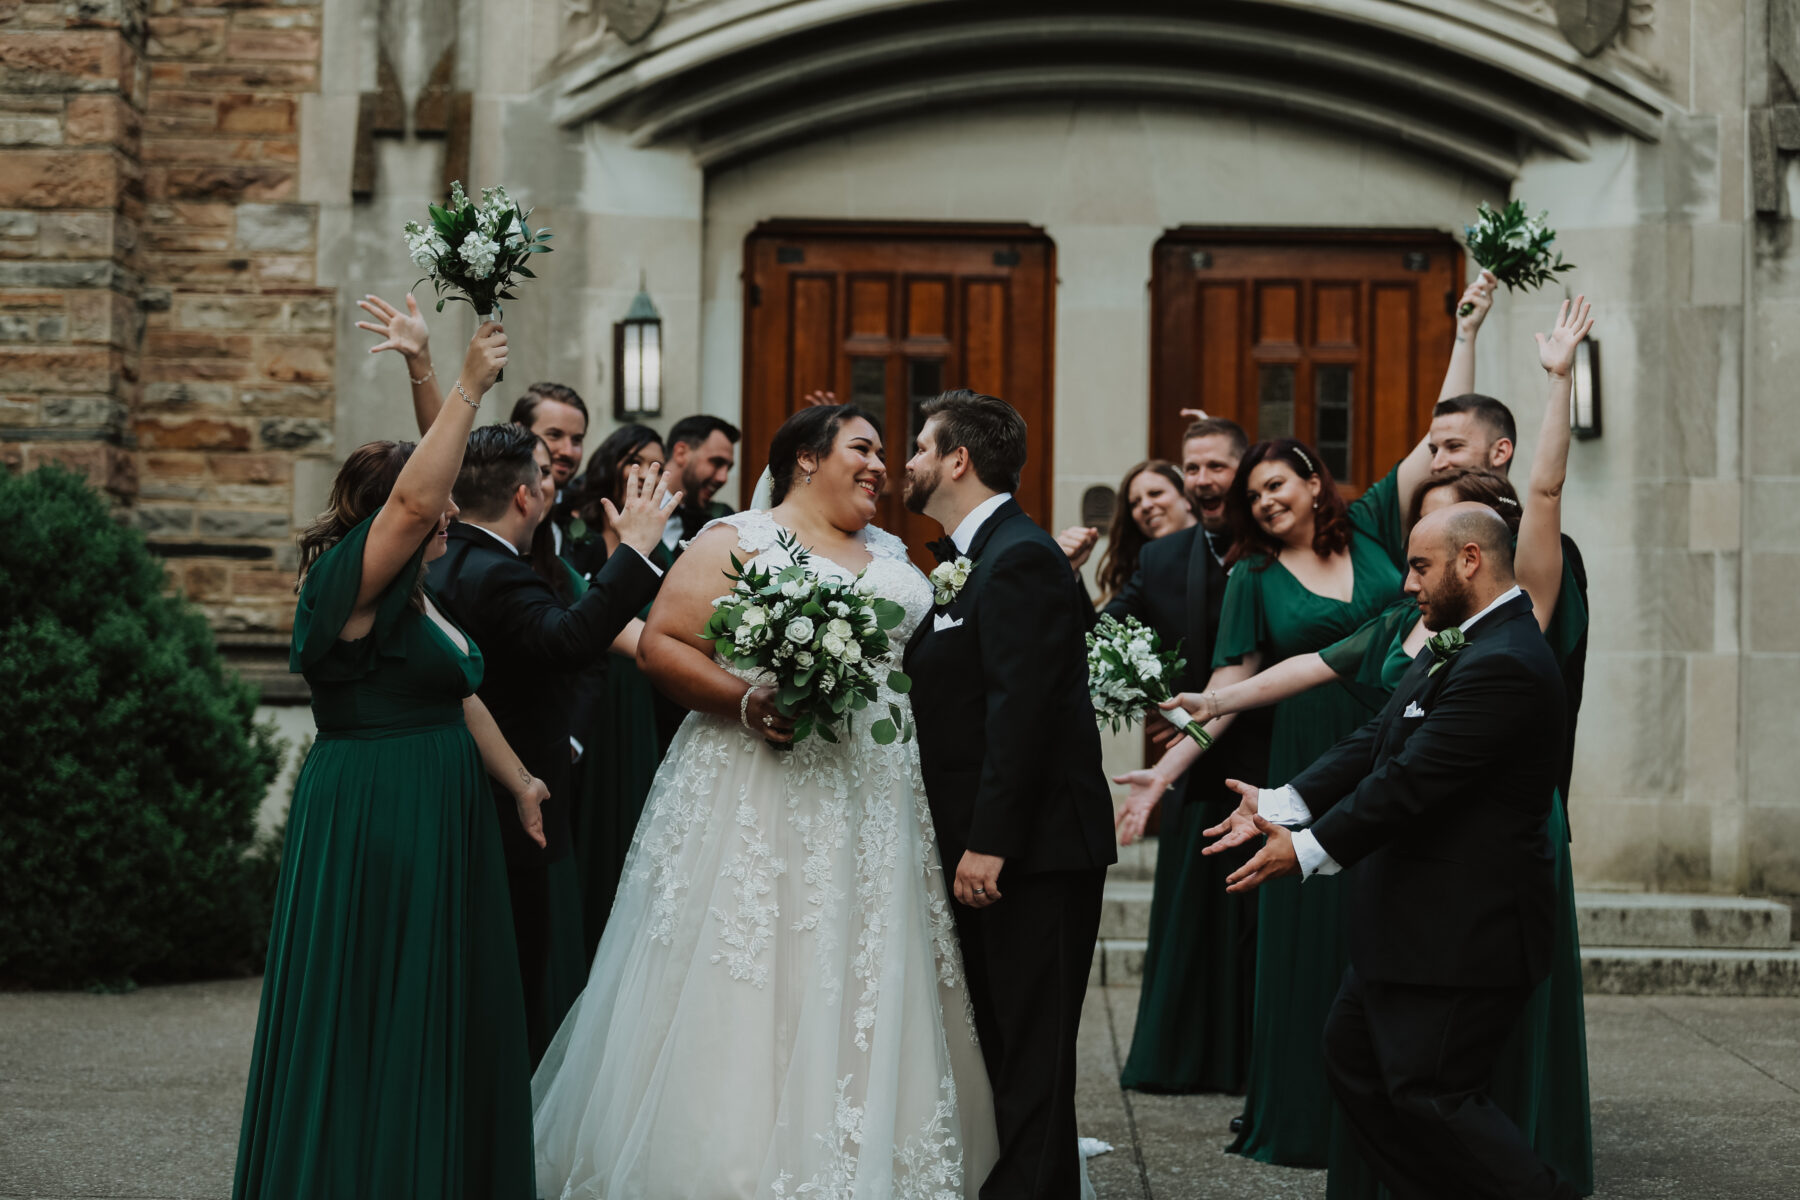 Regal Inspired Wedding at The McConnell House | Nashville Bride Guide